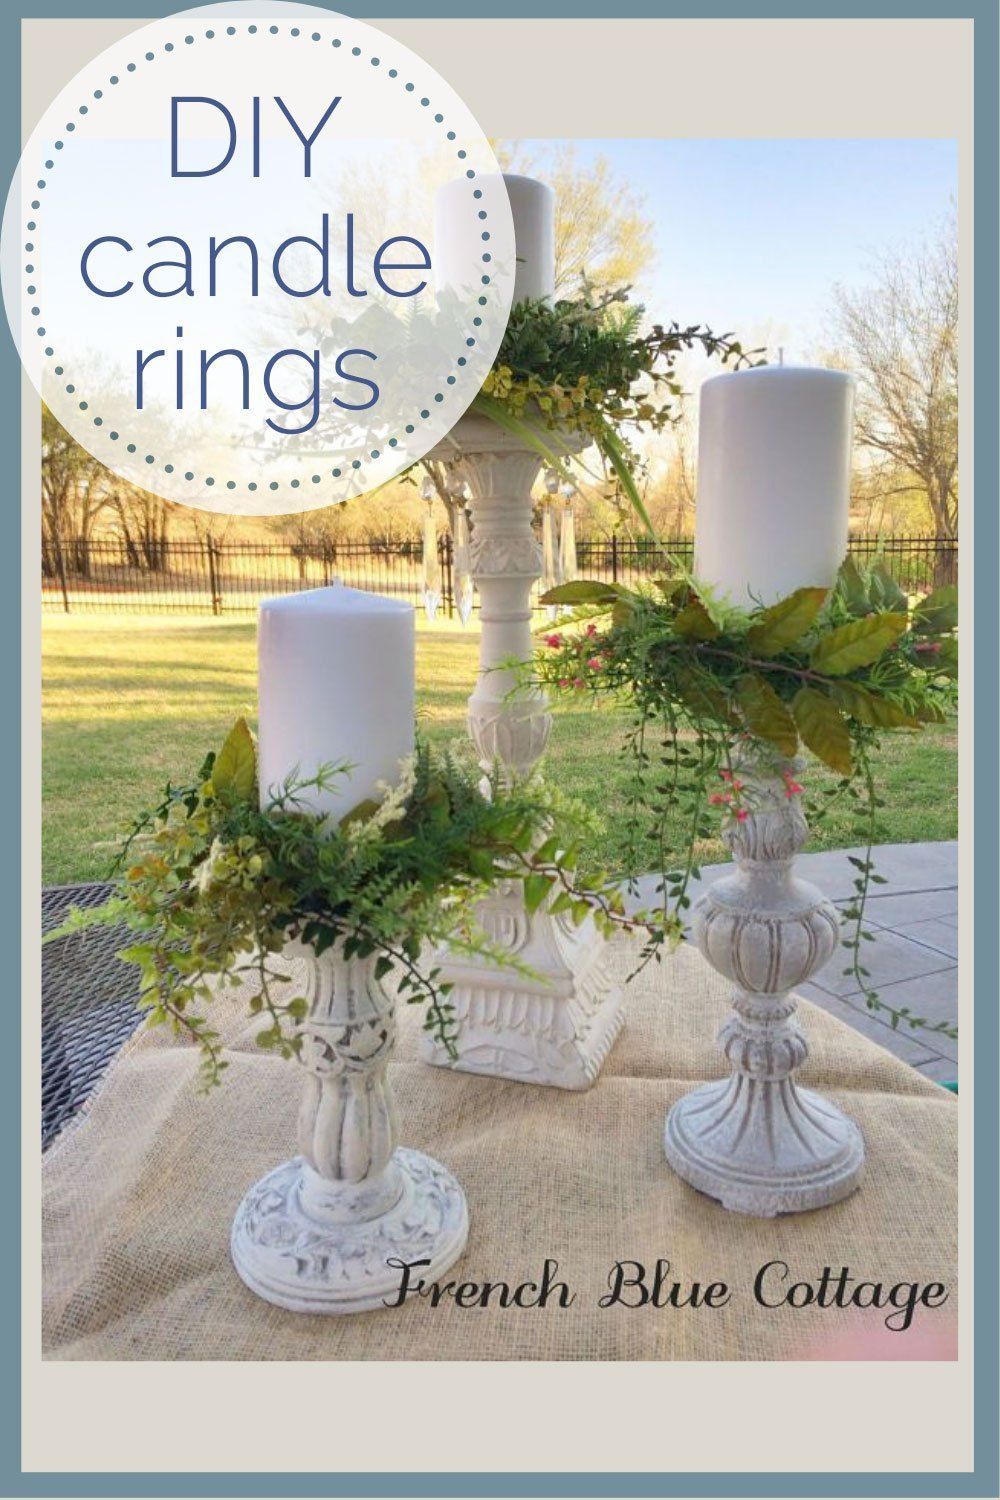 Spring Greenery Candle Rings • French Blue Cottage - Spring Greenery Candle Rings • French Blue Cottage -   diy Candles sticks